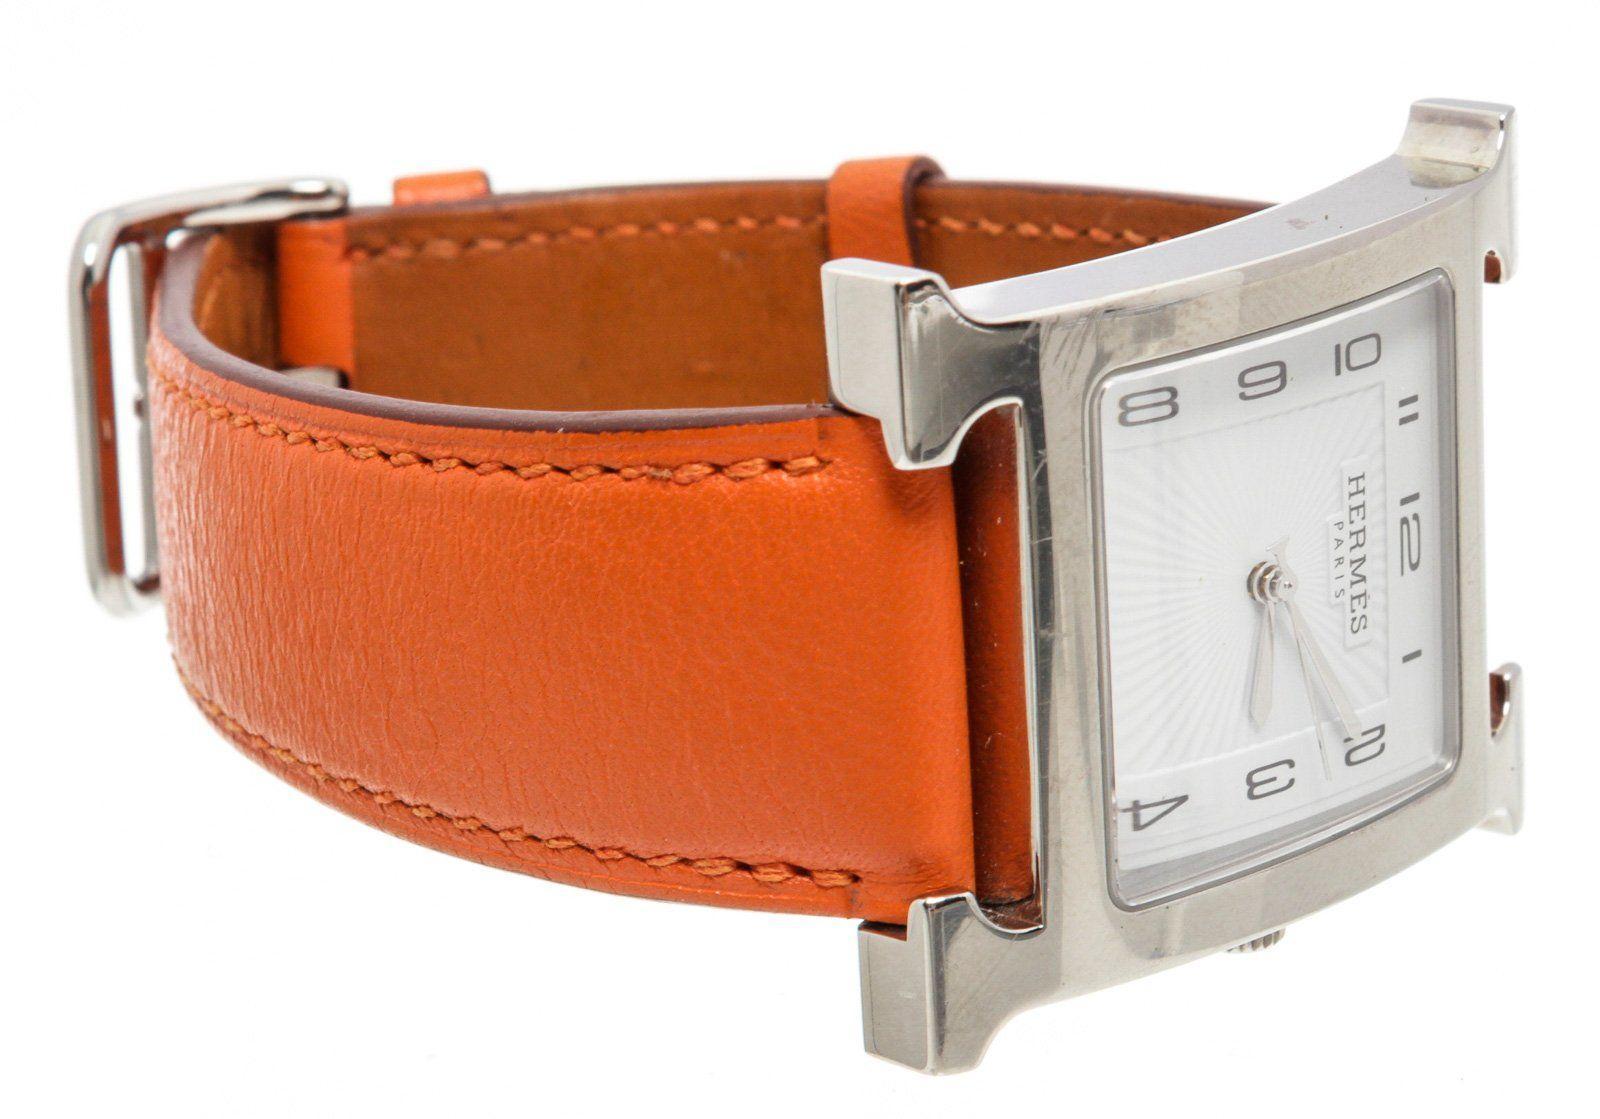 Stainless steel 30.5mm x 30.5mm Hermès Heure H watch featuring a quartz movement, smooth bezel, silver dial and orange leather strap with tang buckle.

14989MSC